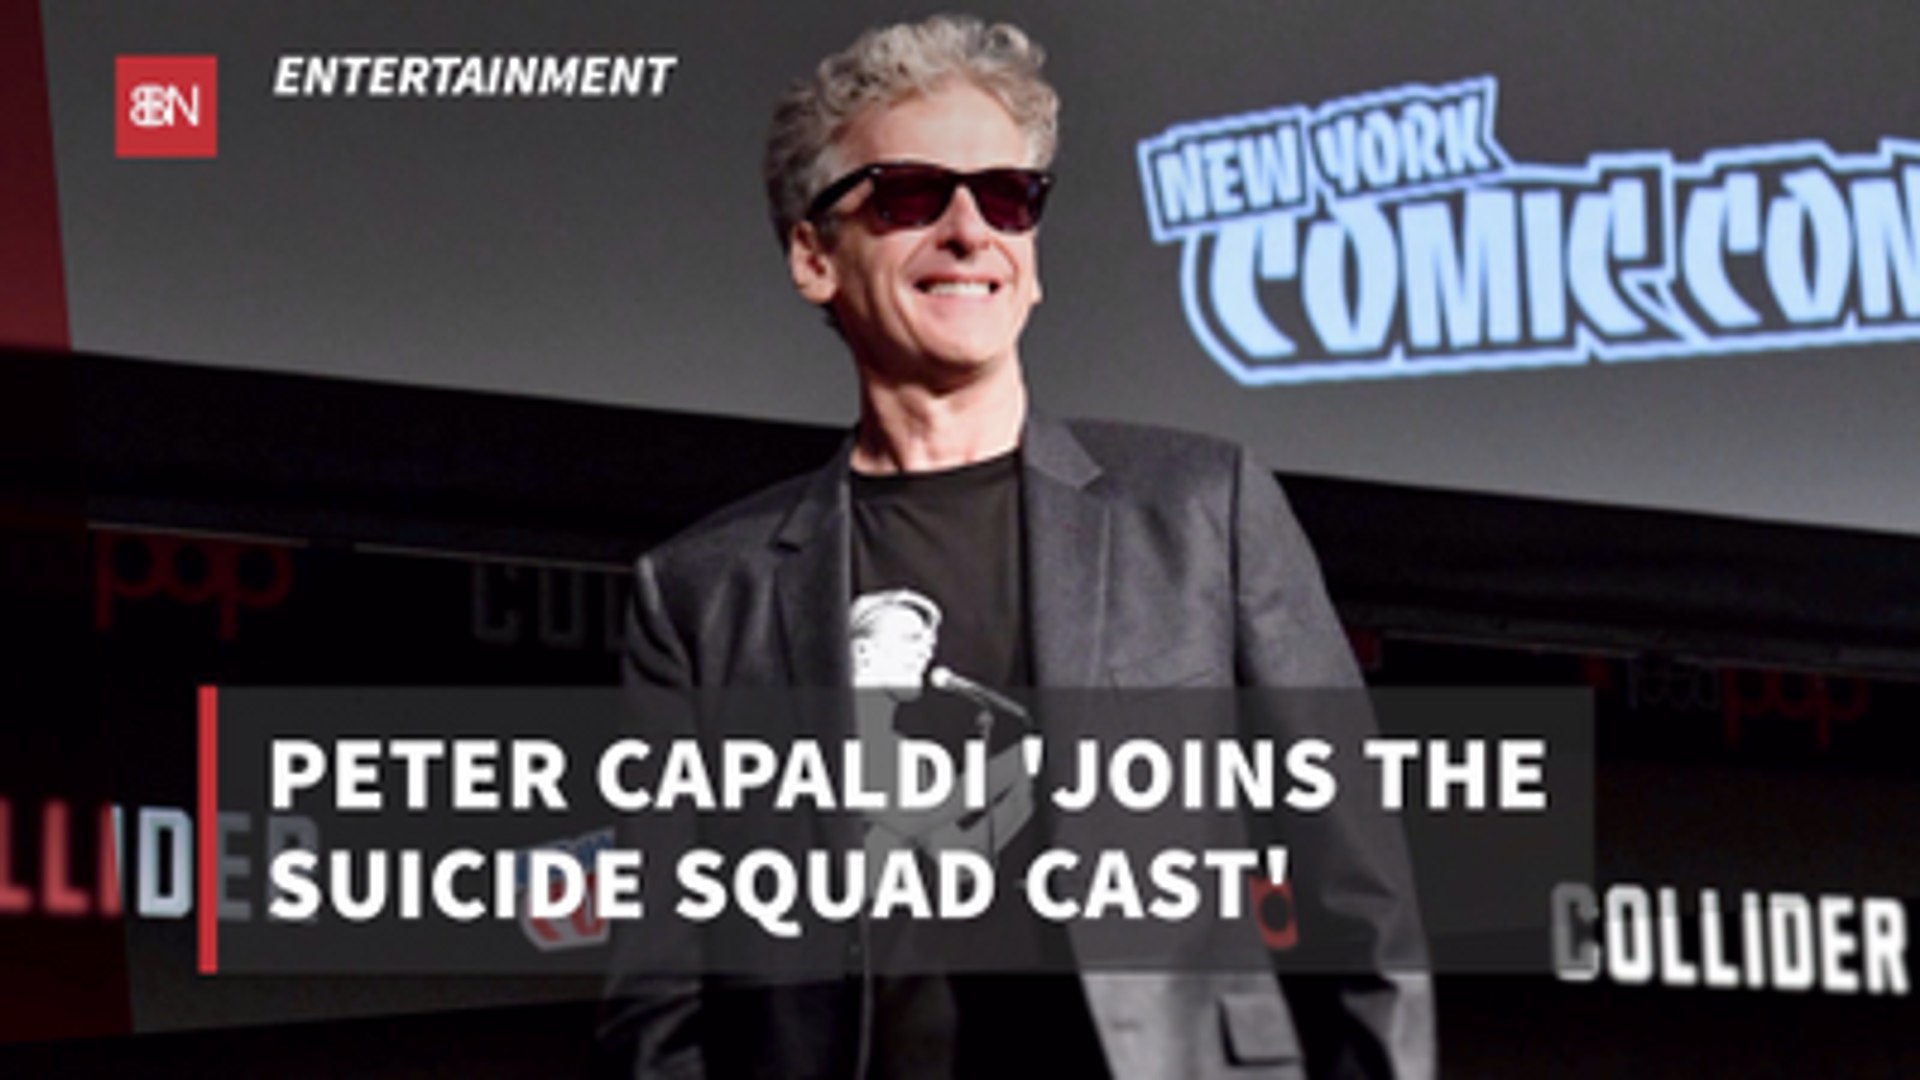 ⁣The 'Suicide Squad' Welcomes Peter Capaldi